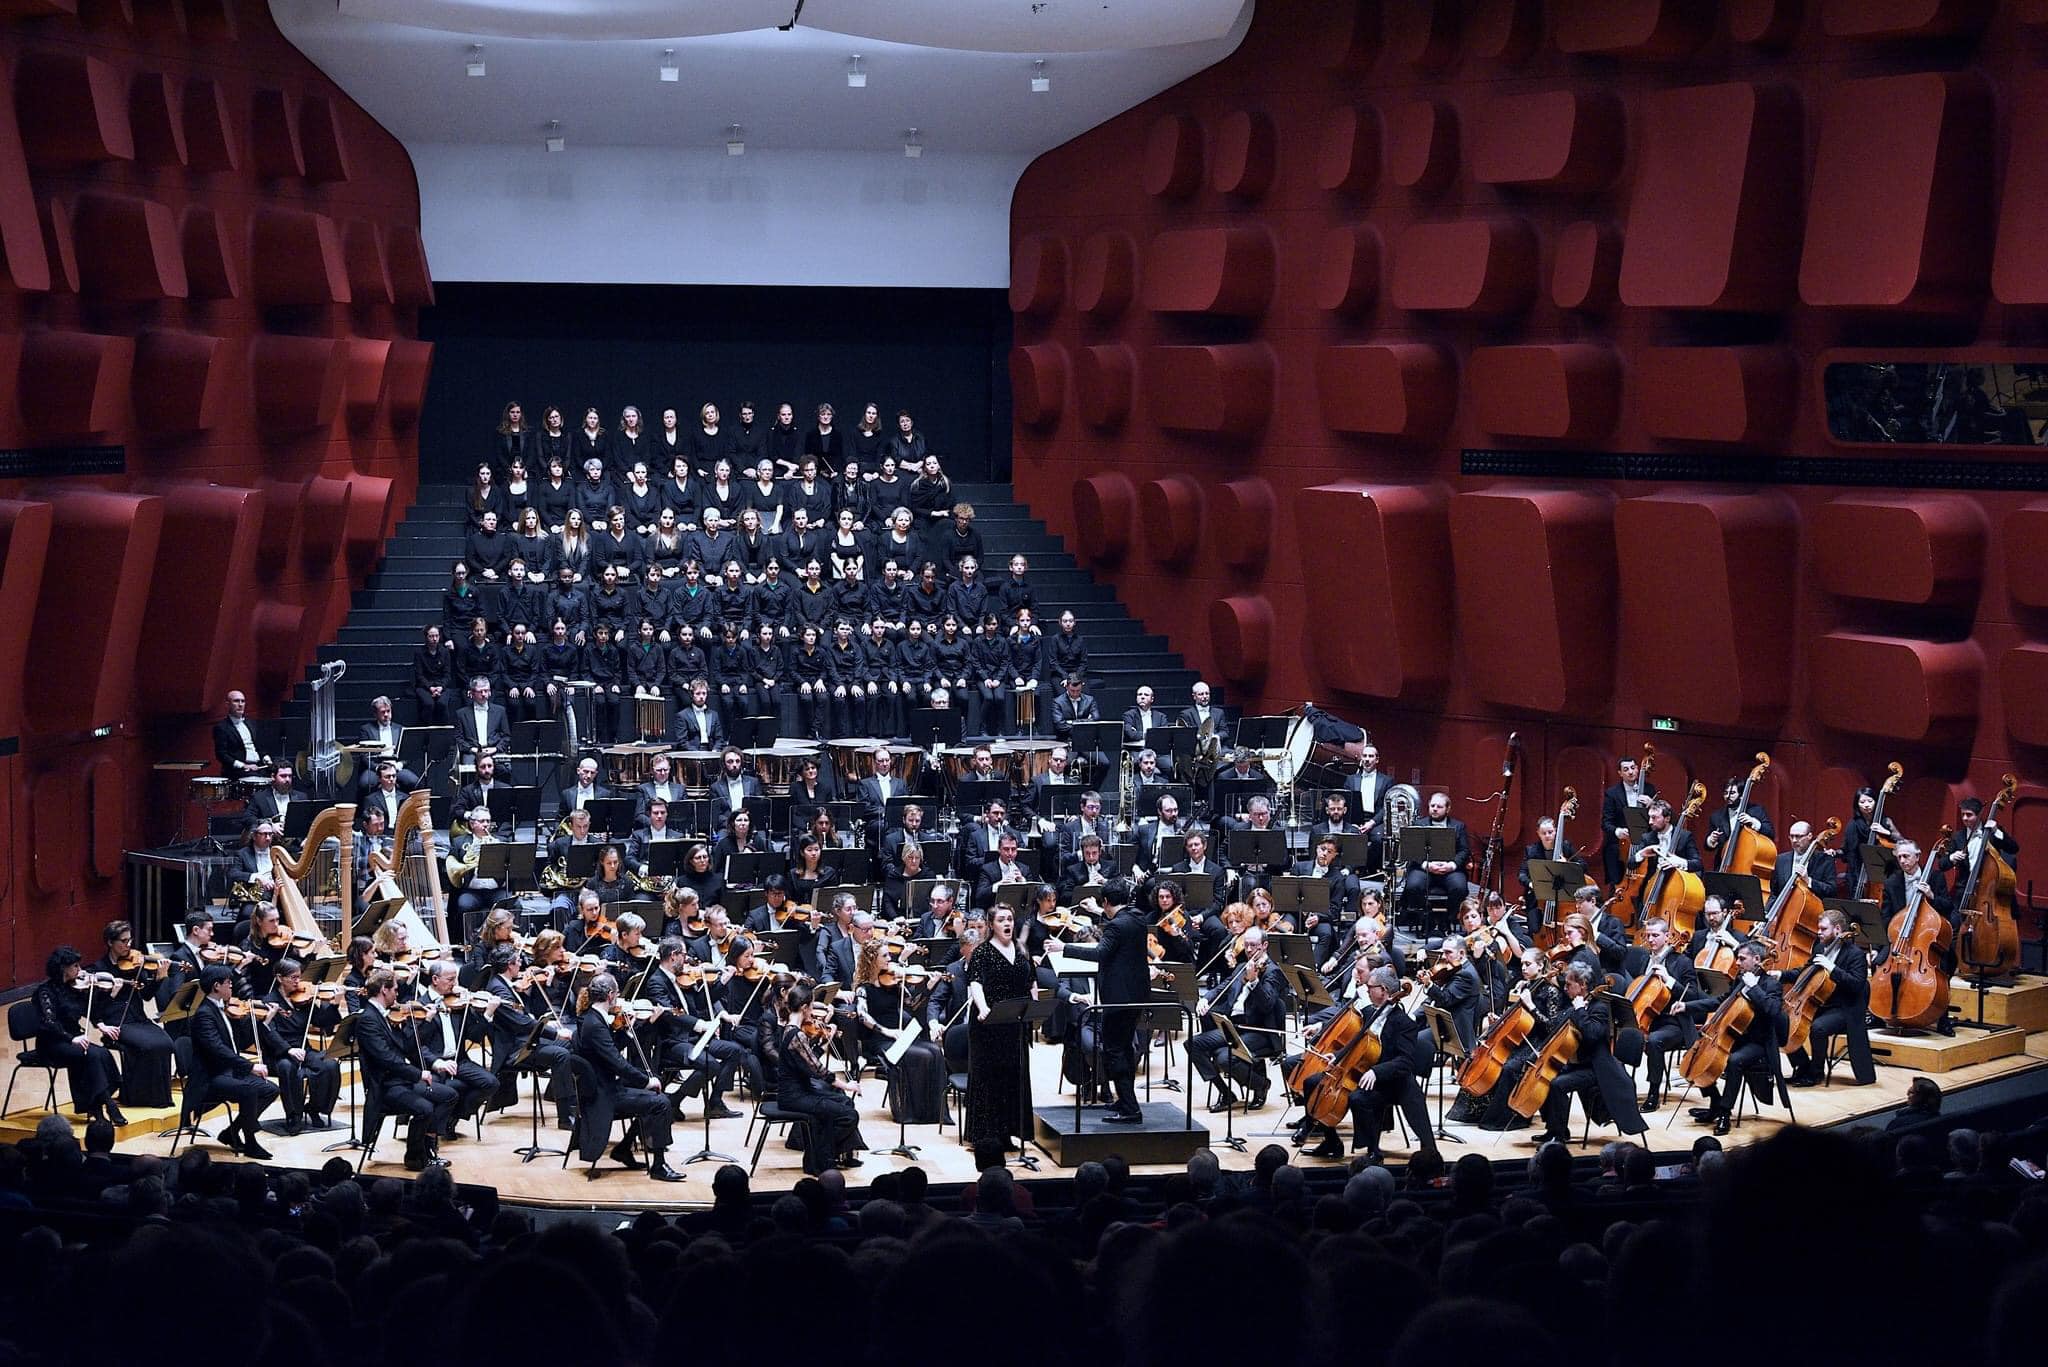 Suffering orchestras (4): Strasbourg can still afford to tour